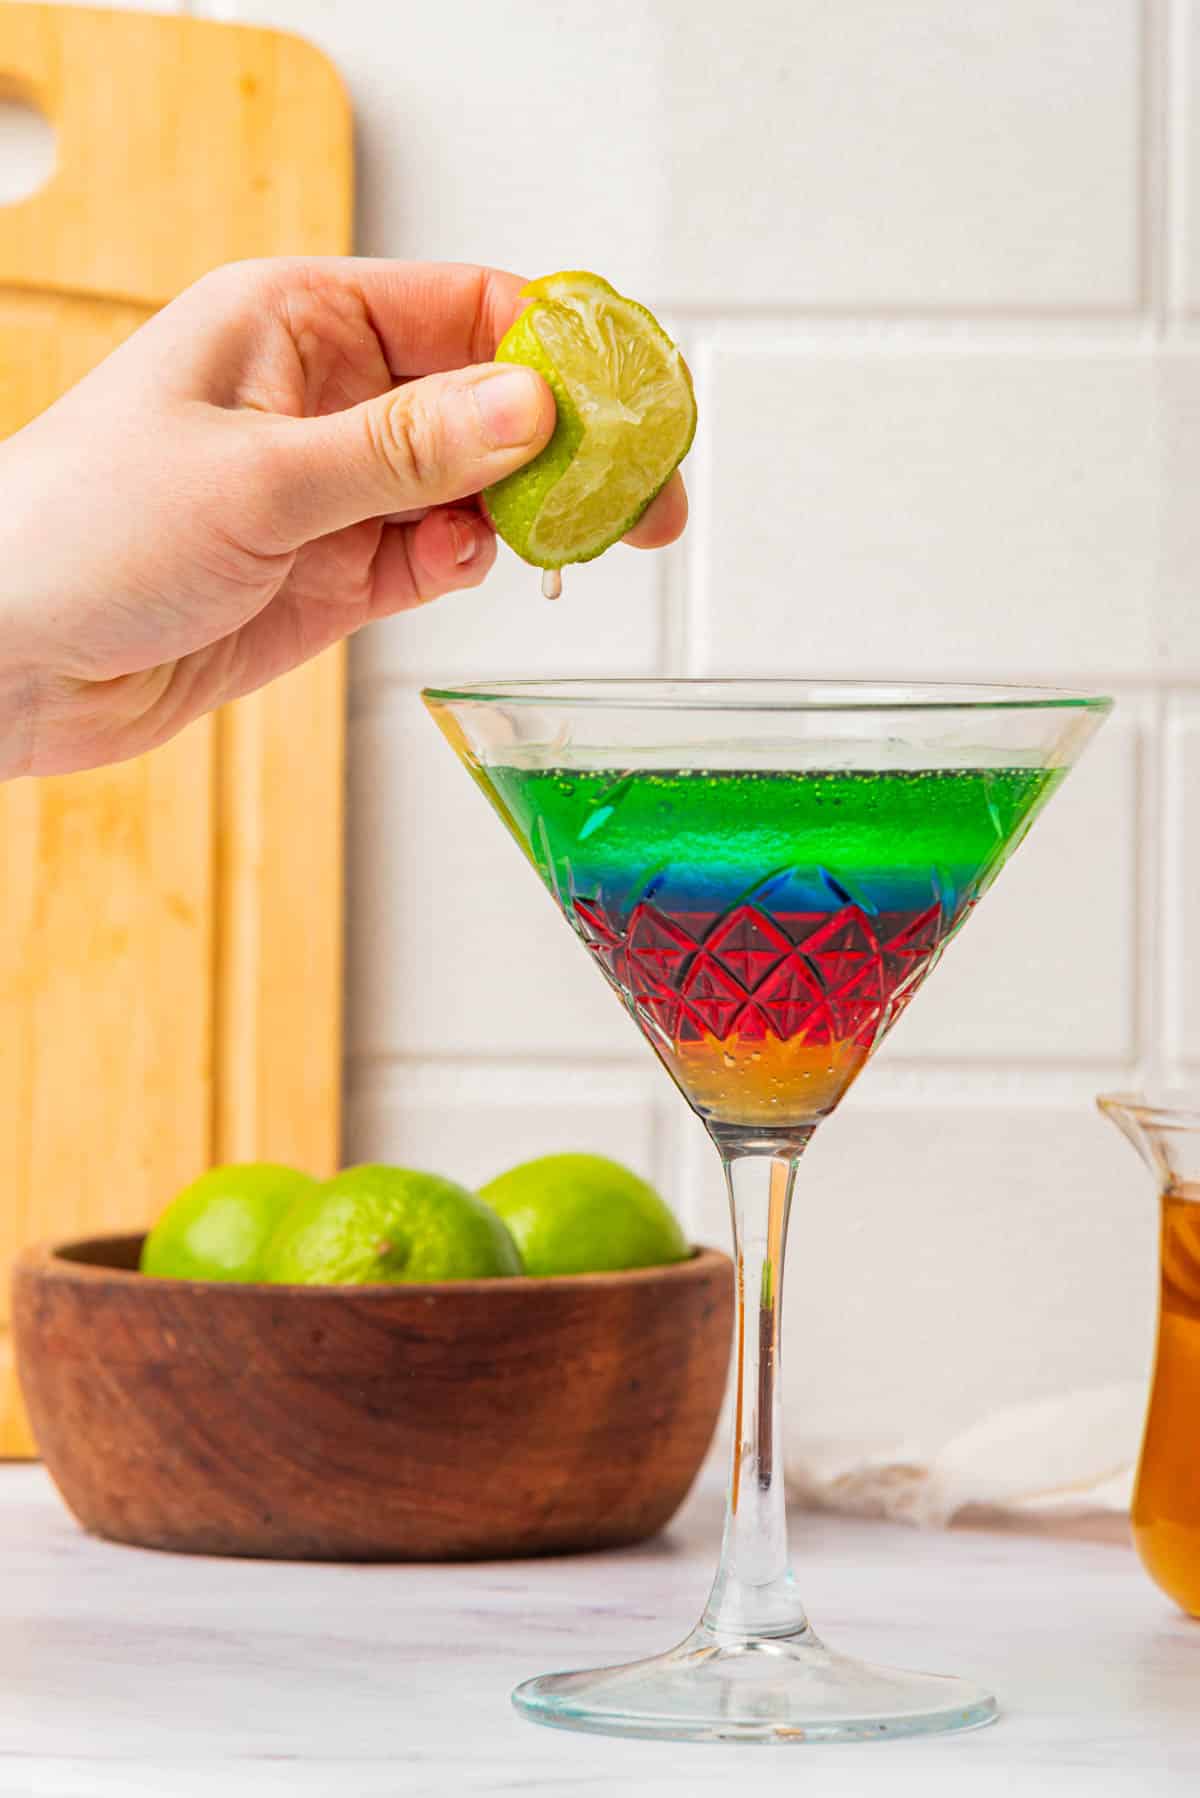 Squeezing lime into a martini glass with liquid in the colors of the Olympic Rings with a jigger on side, limes, bottles, and honey in background.